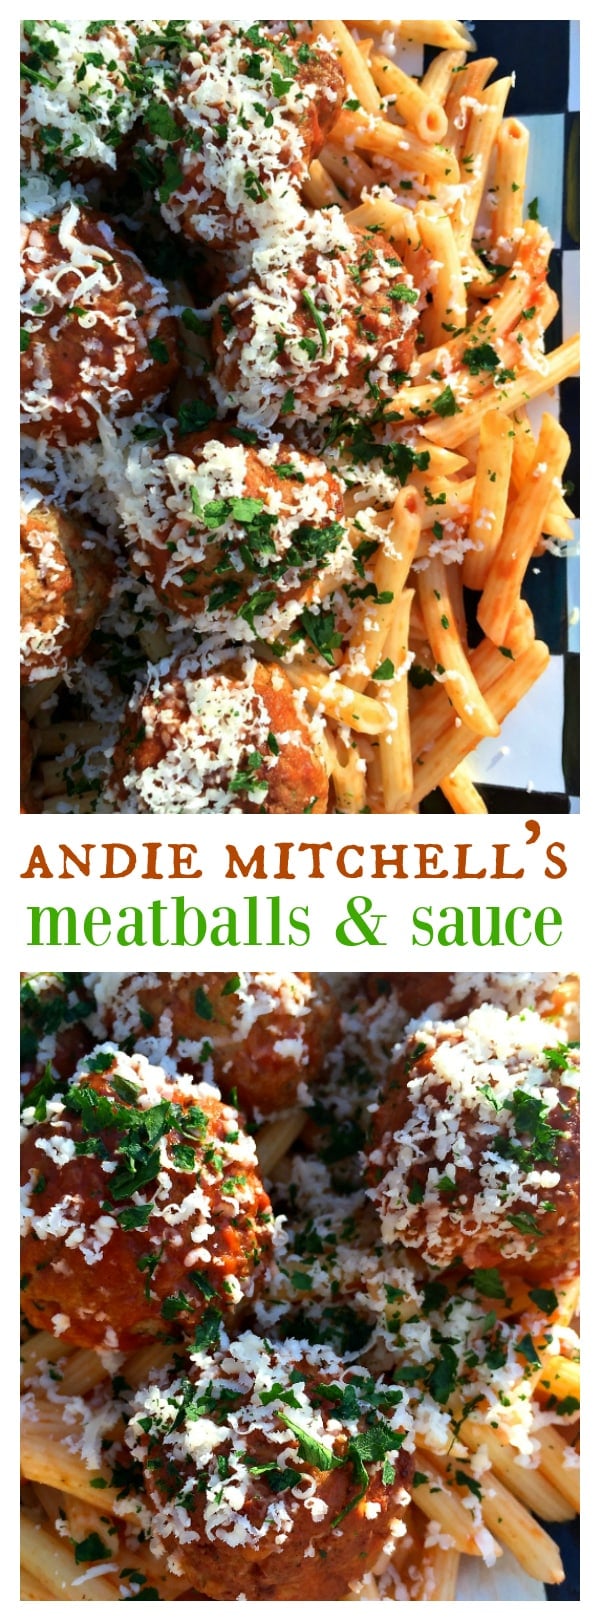 Andie Mitchell's PJ's Meatballs and Sauce